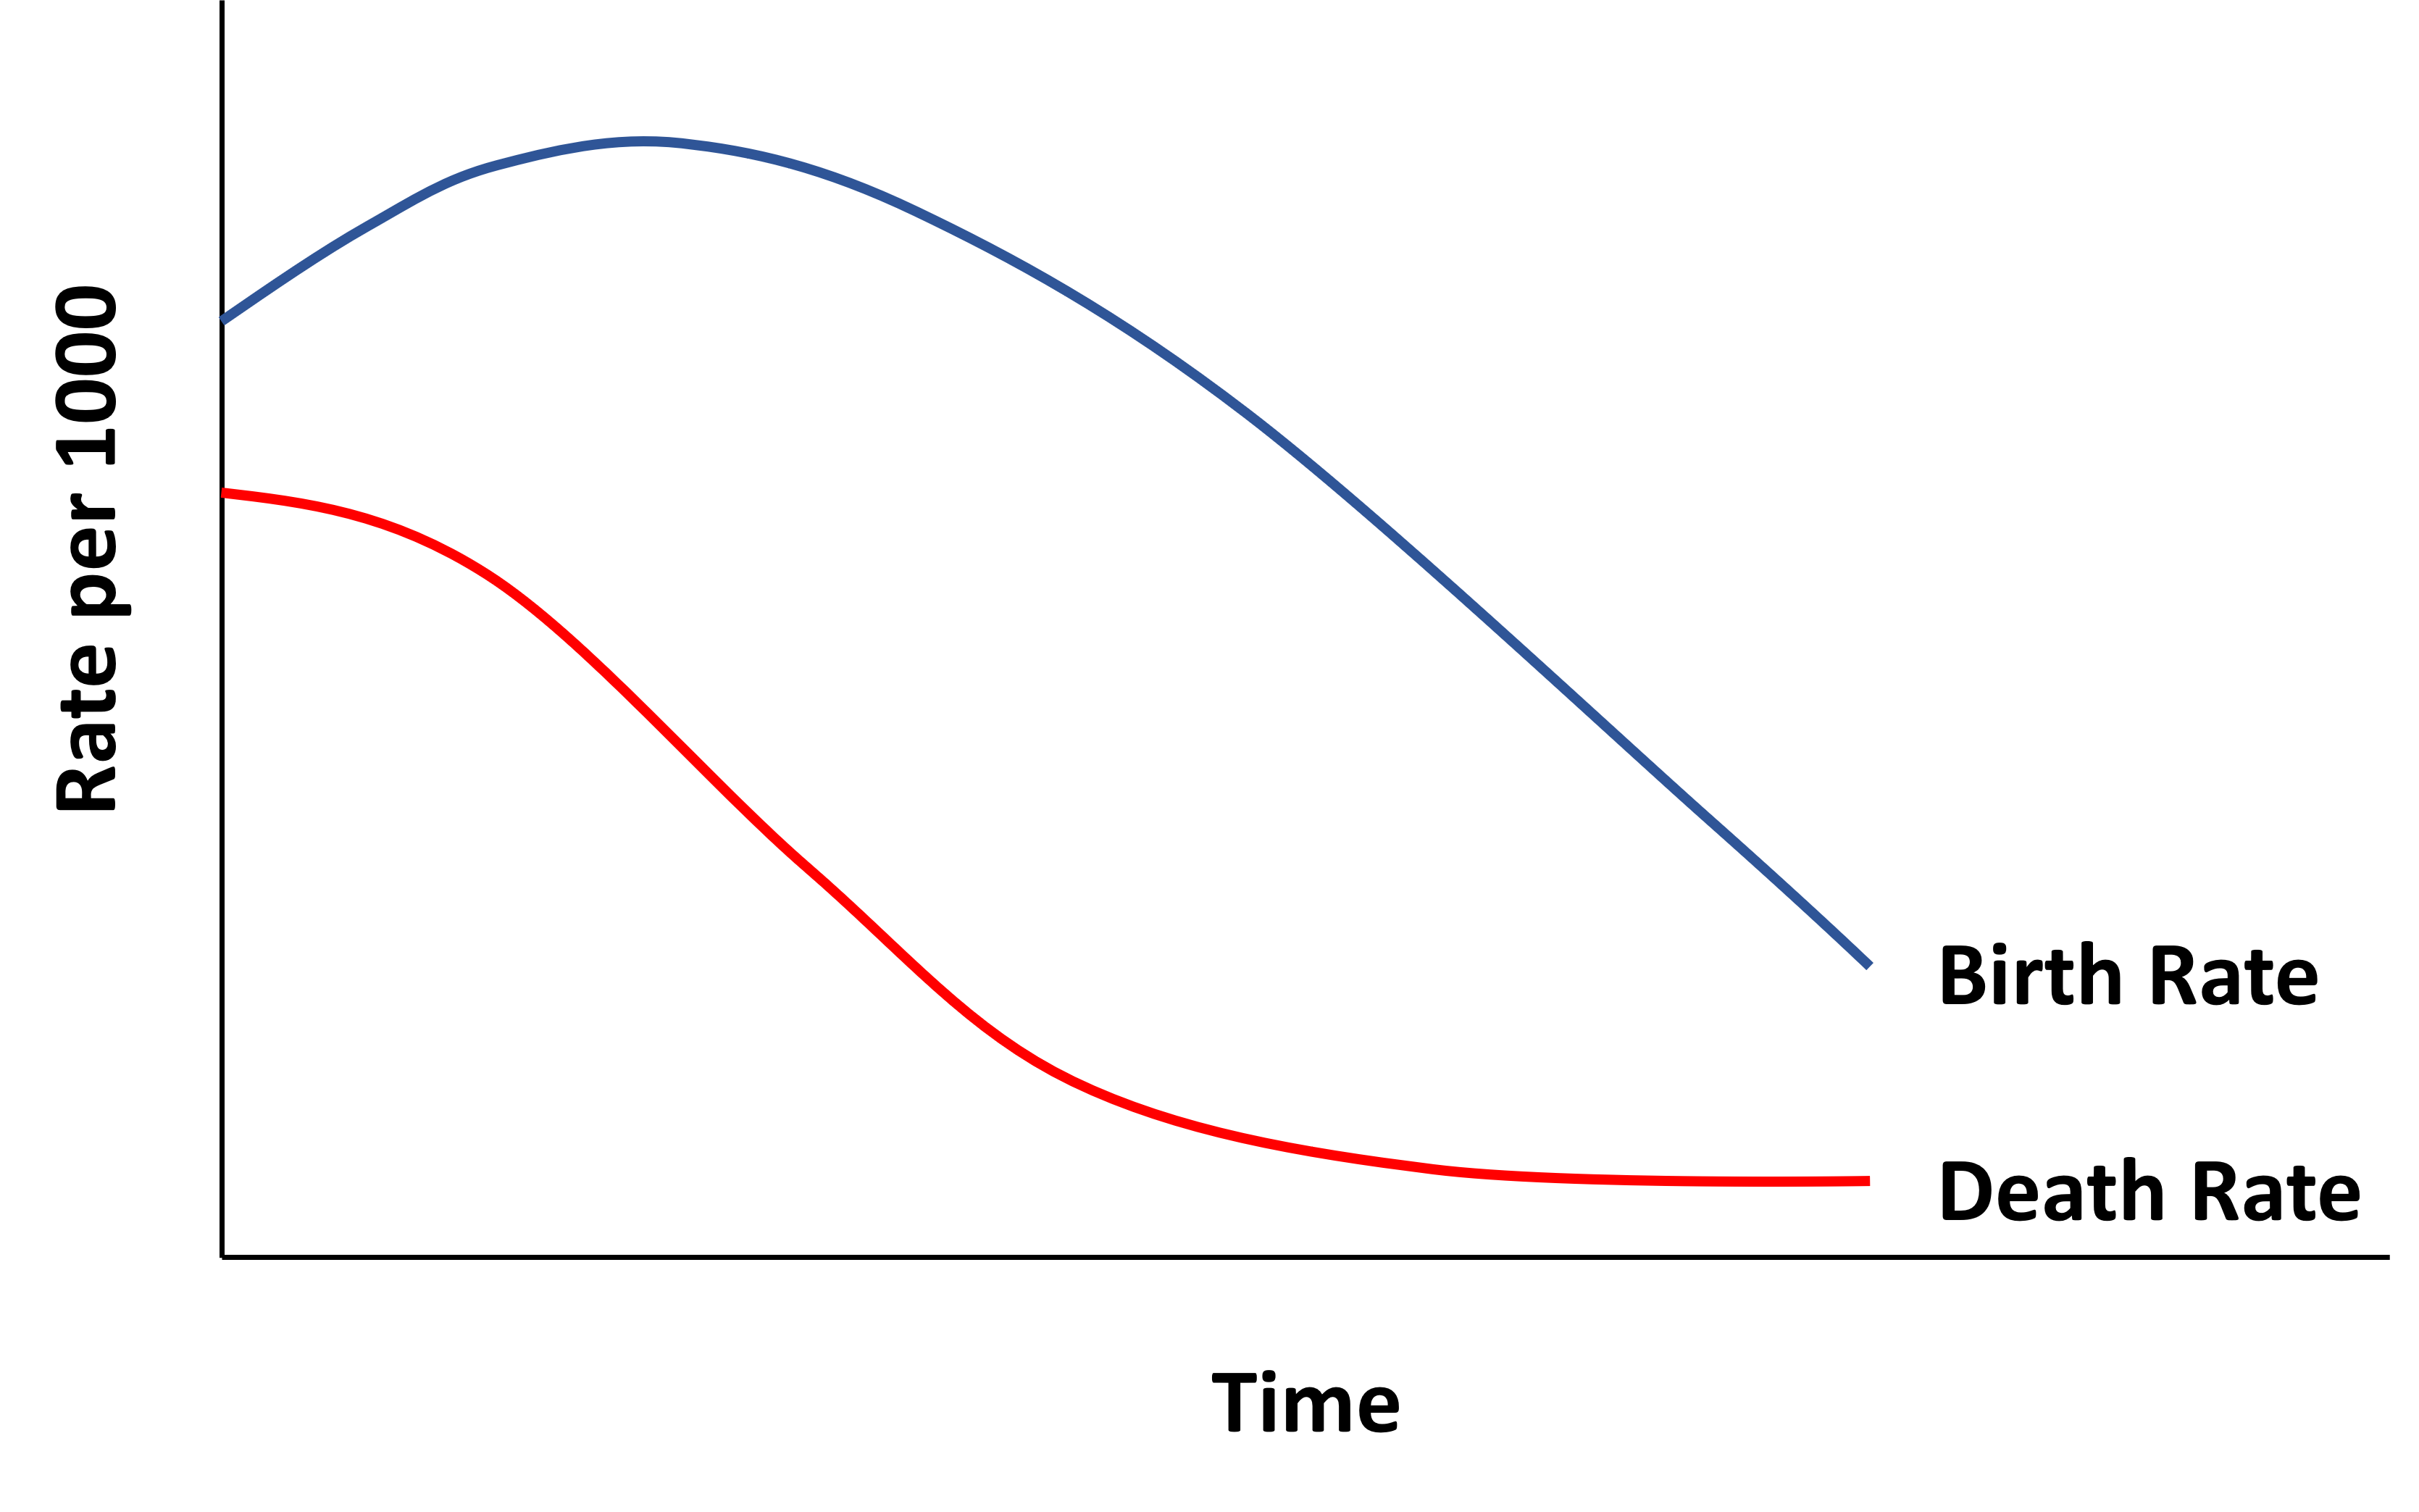 This graph has time on the horizontal axis. At time = 0, the birth rate is above the death rate. As time progresses, the birth rate rises while the death rate falls, thus the gap between them grows. At some point they are both declining. Finally the birth rate and death rate are close together again.